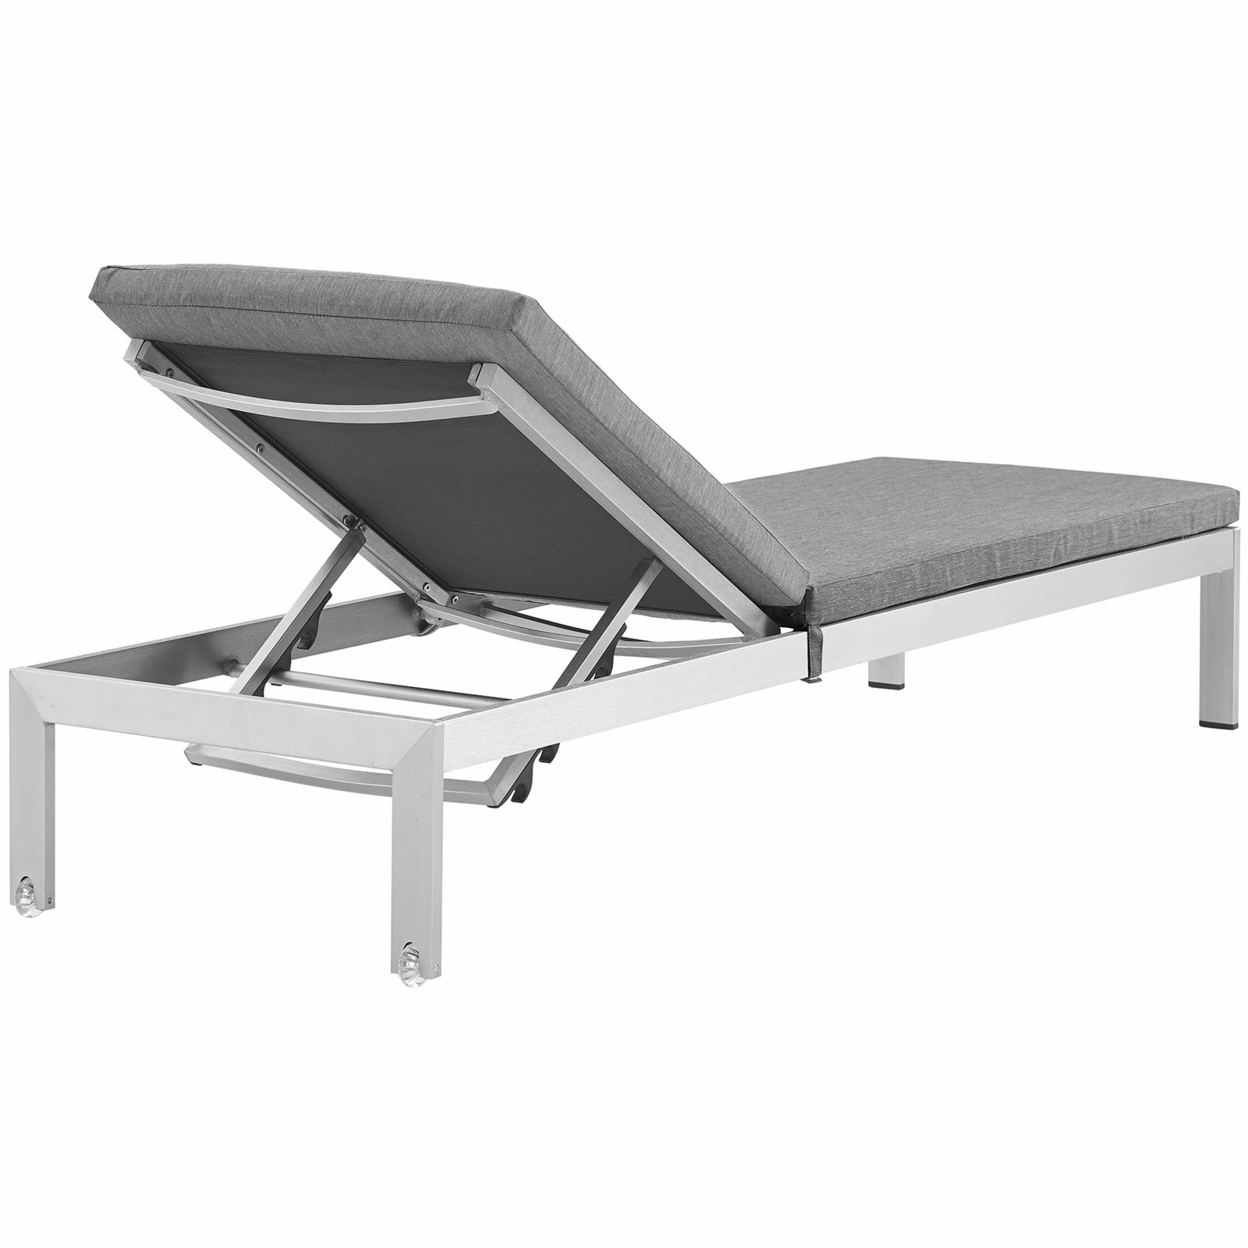 Shore Outdoor Patio Aluminum Chaise with Cushions Silver gray - image 4 of 5